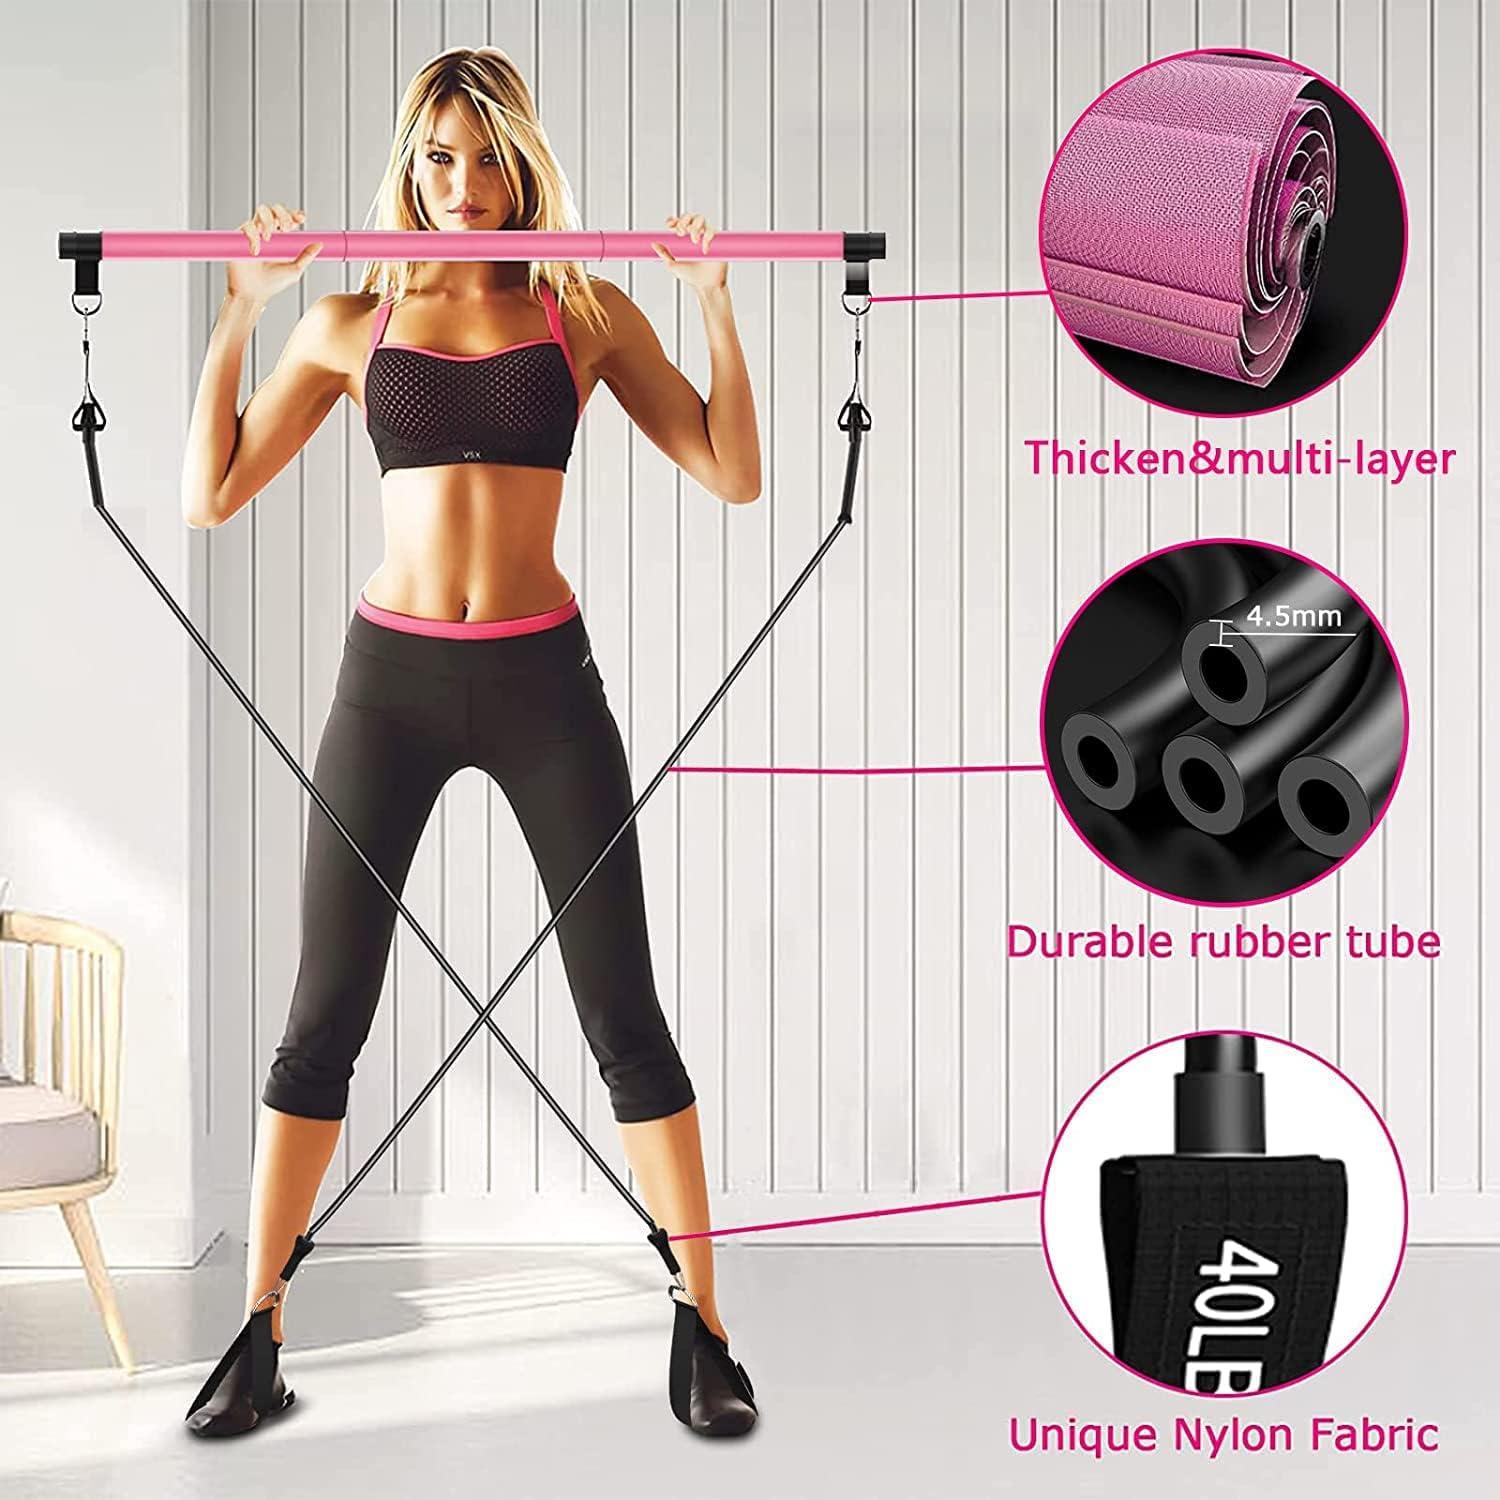 Pilates Bar Kit with 4 Resistance Bands